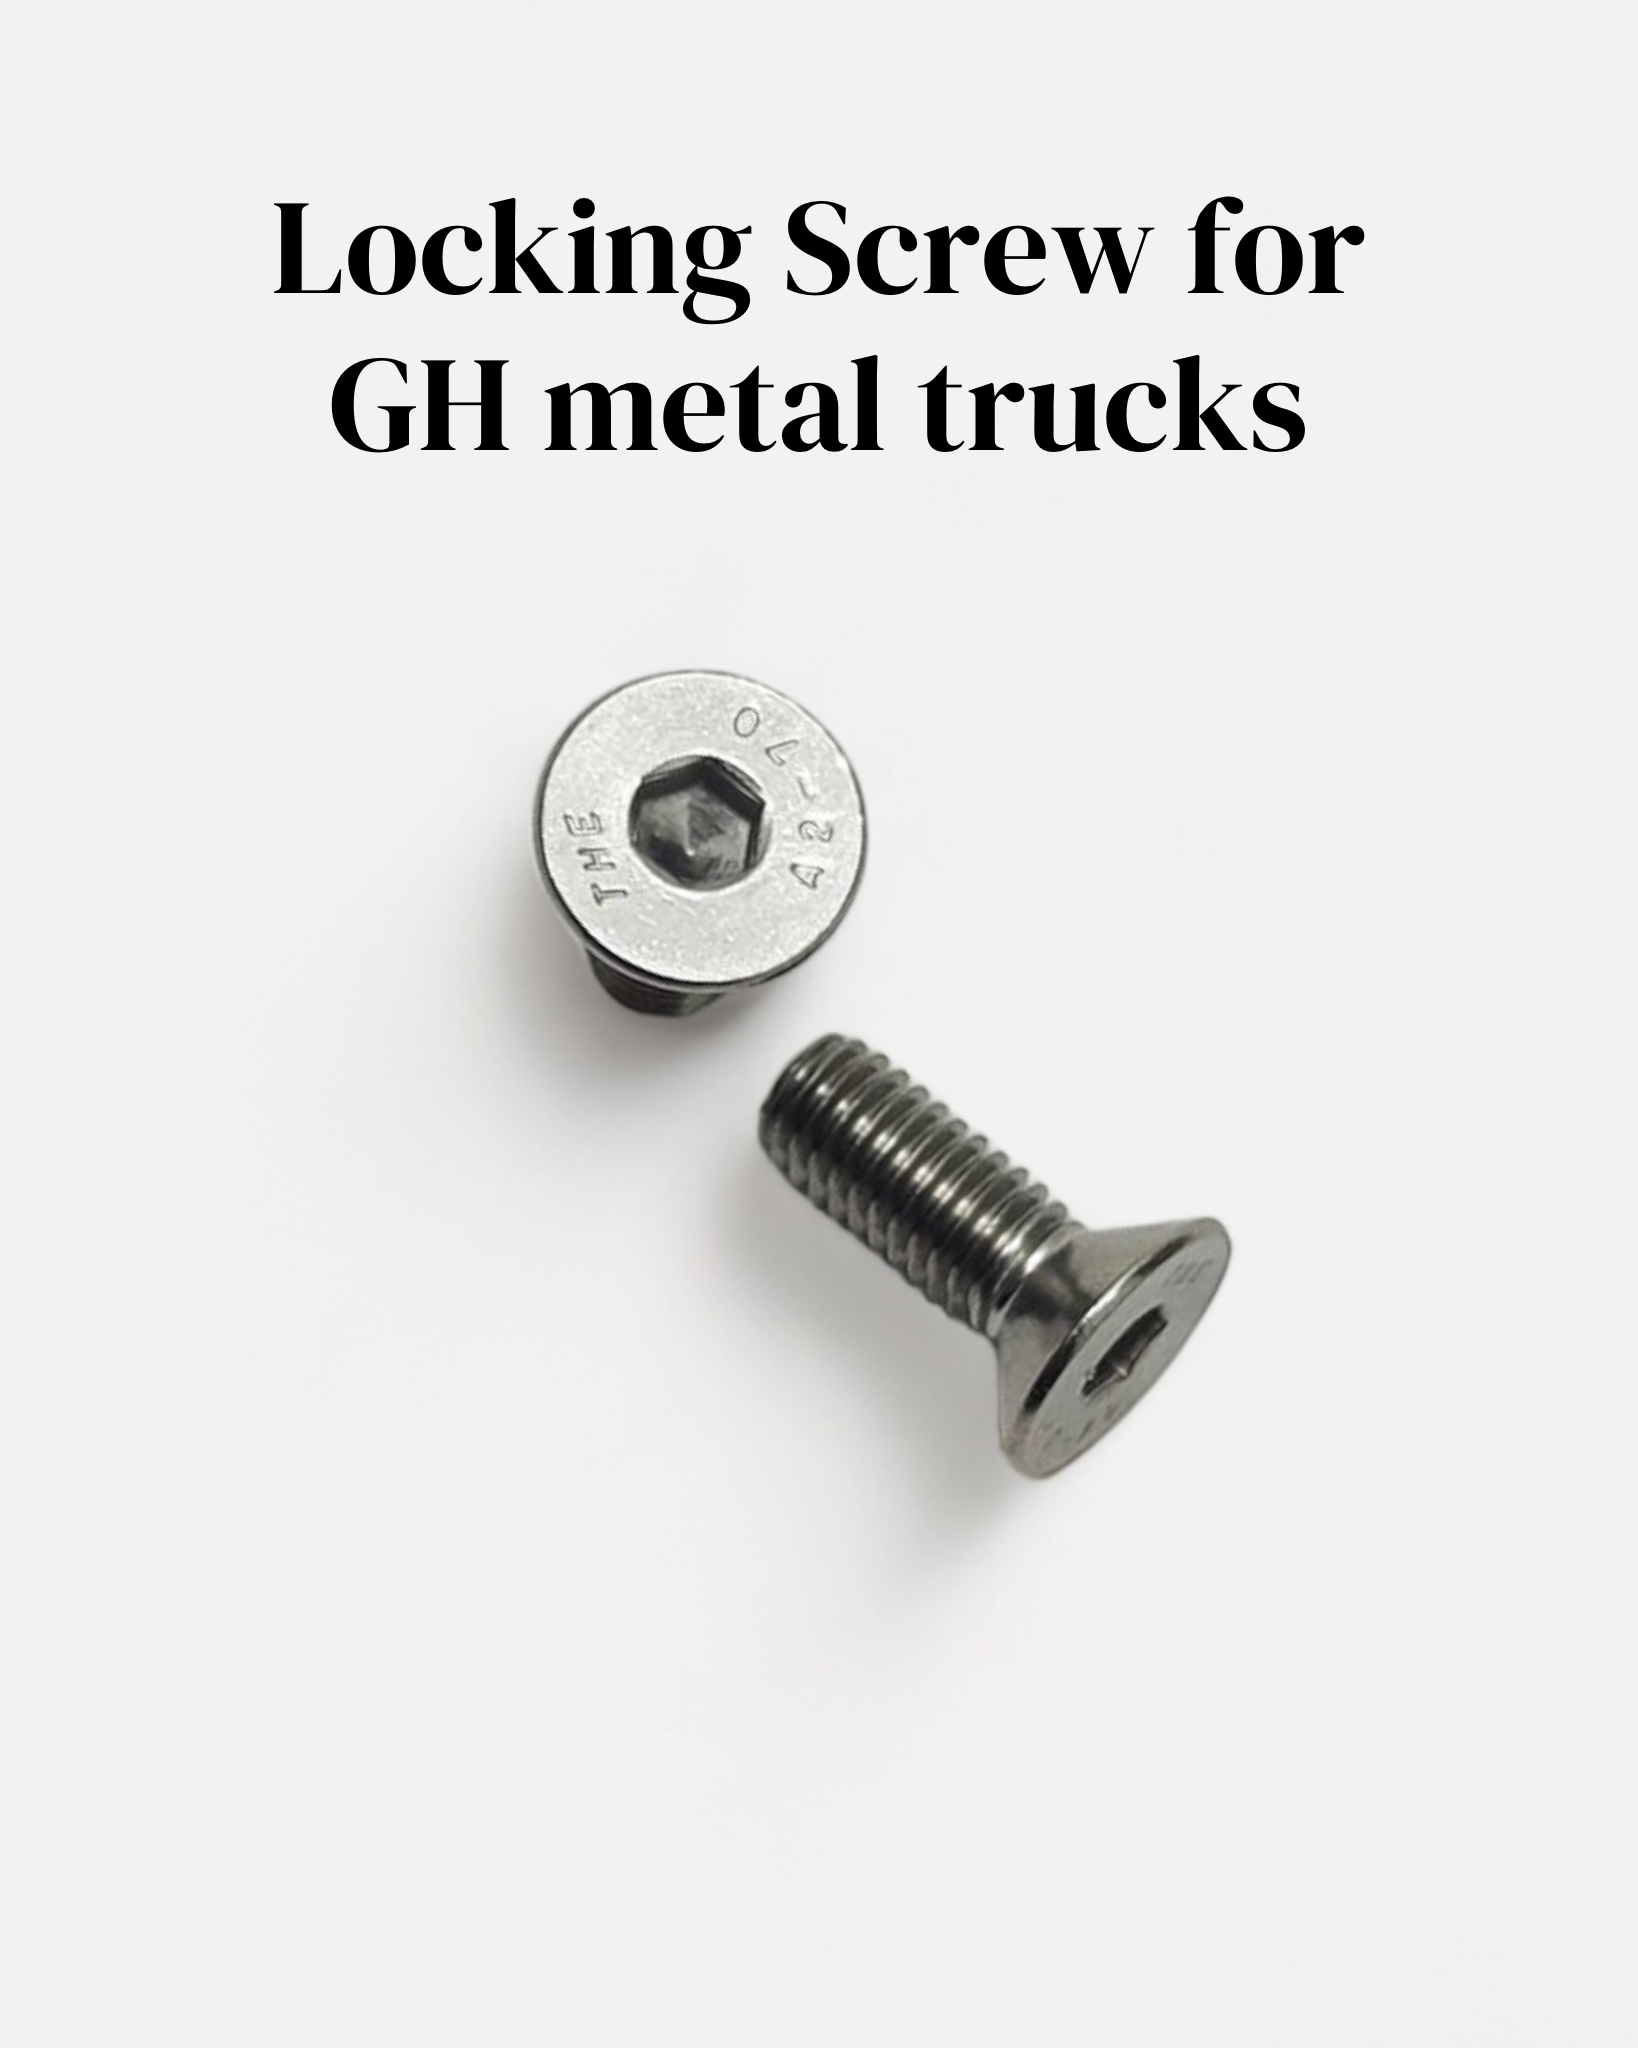 Spare parts for GH metal trucks